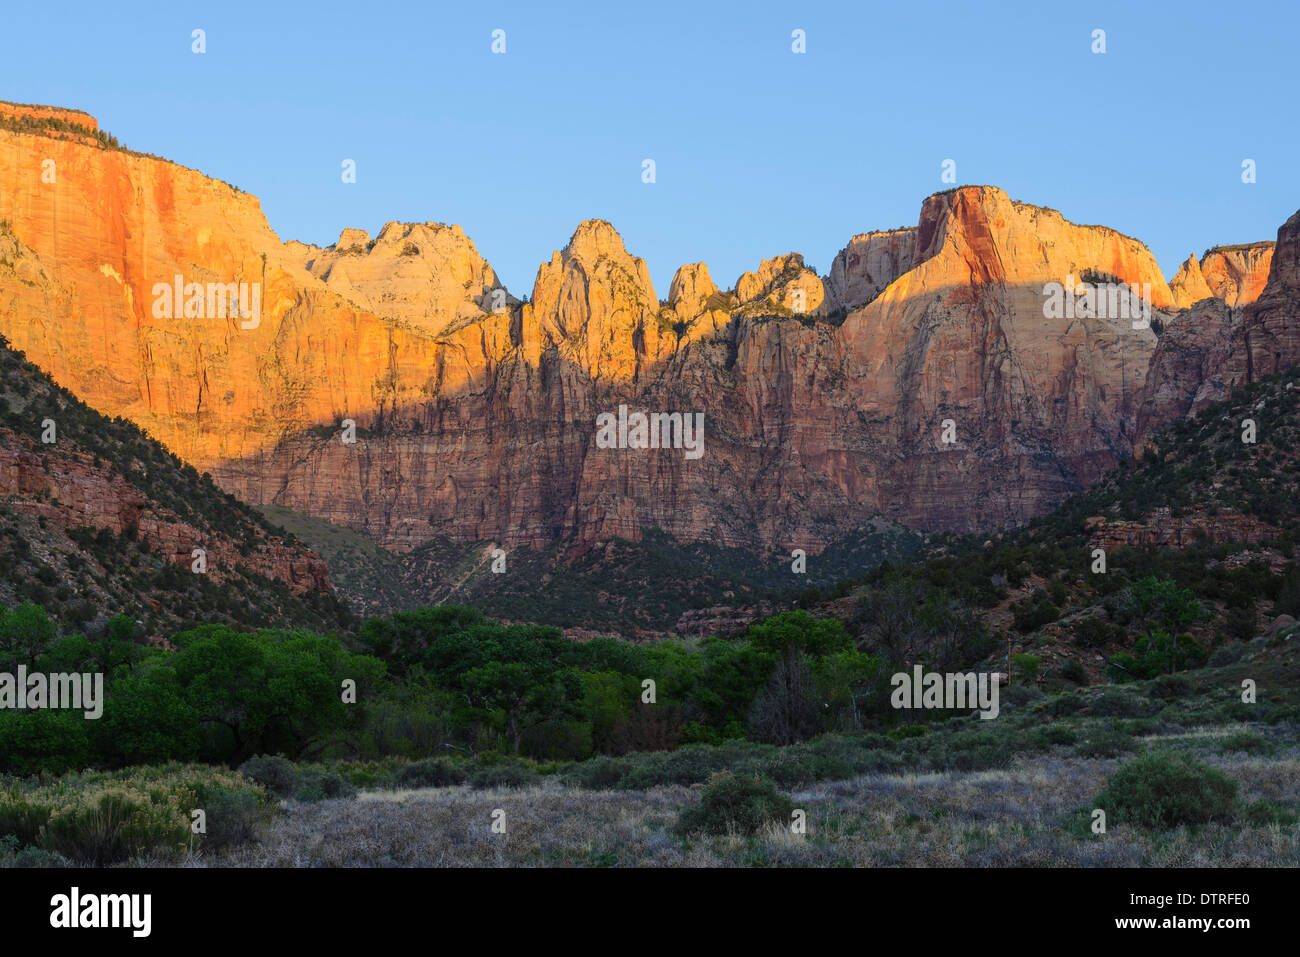 Sunrise over the Towers of the Virgin, Zion National Park, Utah, USA Stock Photo